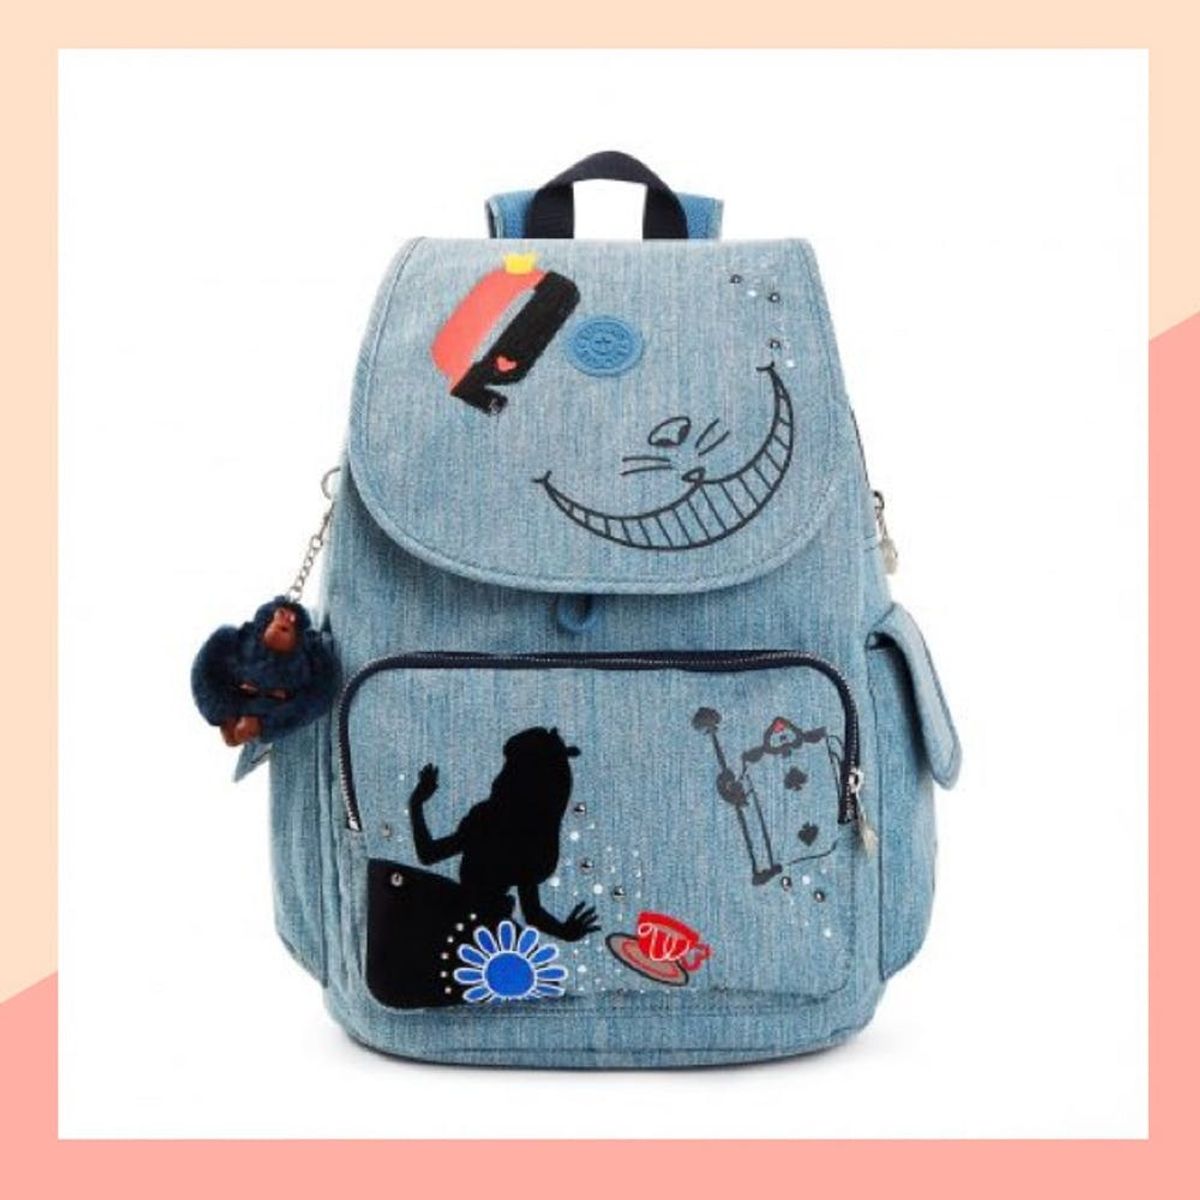 Kipling and Disney Have Teamed Up Again for an Epic ‘Alice in Wonderland’ Collab